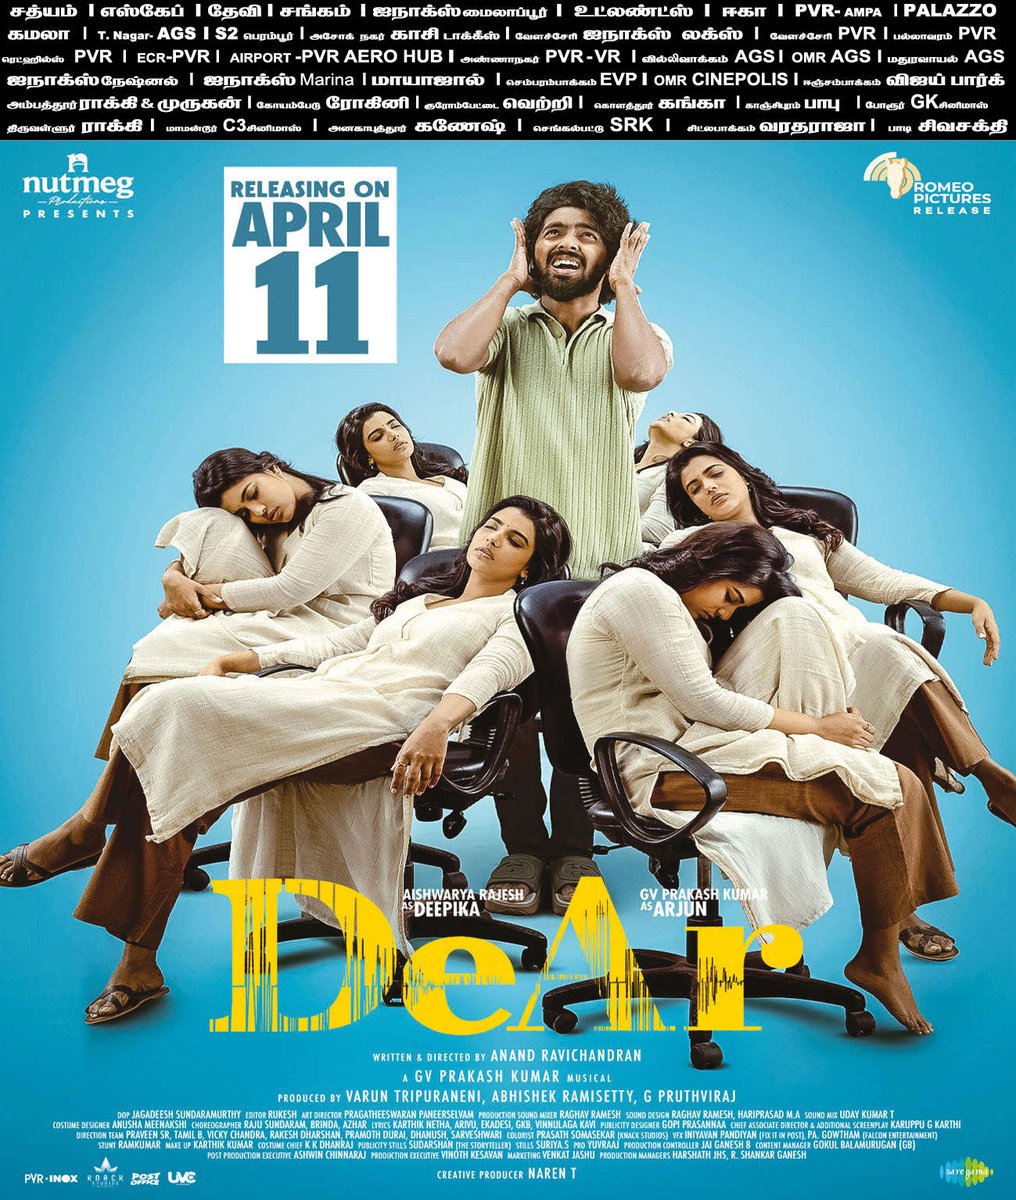 The Lullaby #SleepingBeauty Song from #DeAr Drops Today at 5 PM 😍

@gvprakash Musical 🎶

#DeAr Today Pape Advt
Advance Bookings Opened. In Cinemas From April 11th 📽️  

@aishu_dil @Anand_RChandran #AbhishekRamisetty @tvaroon #PruthvirajG #RomeoPictures @NutmegProd @proyuvraaj